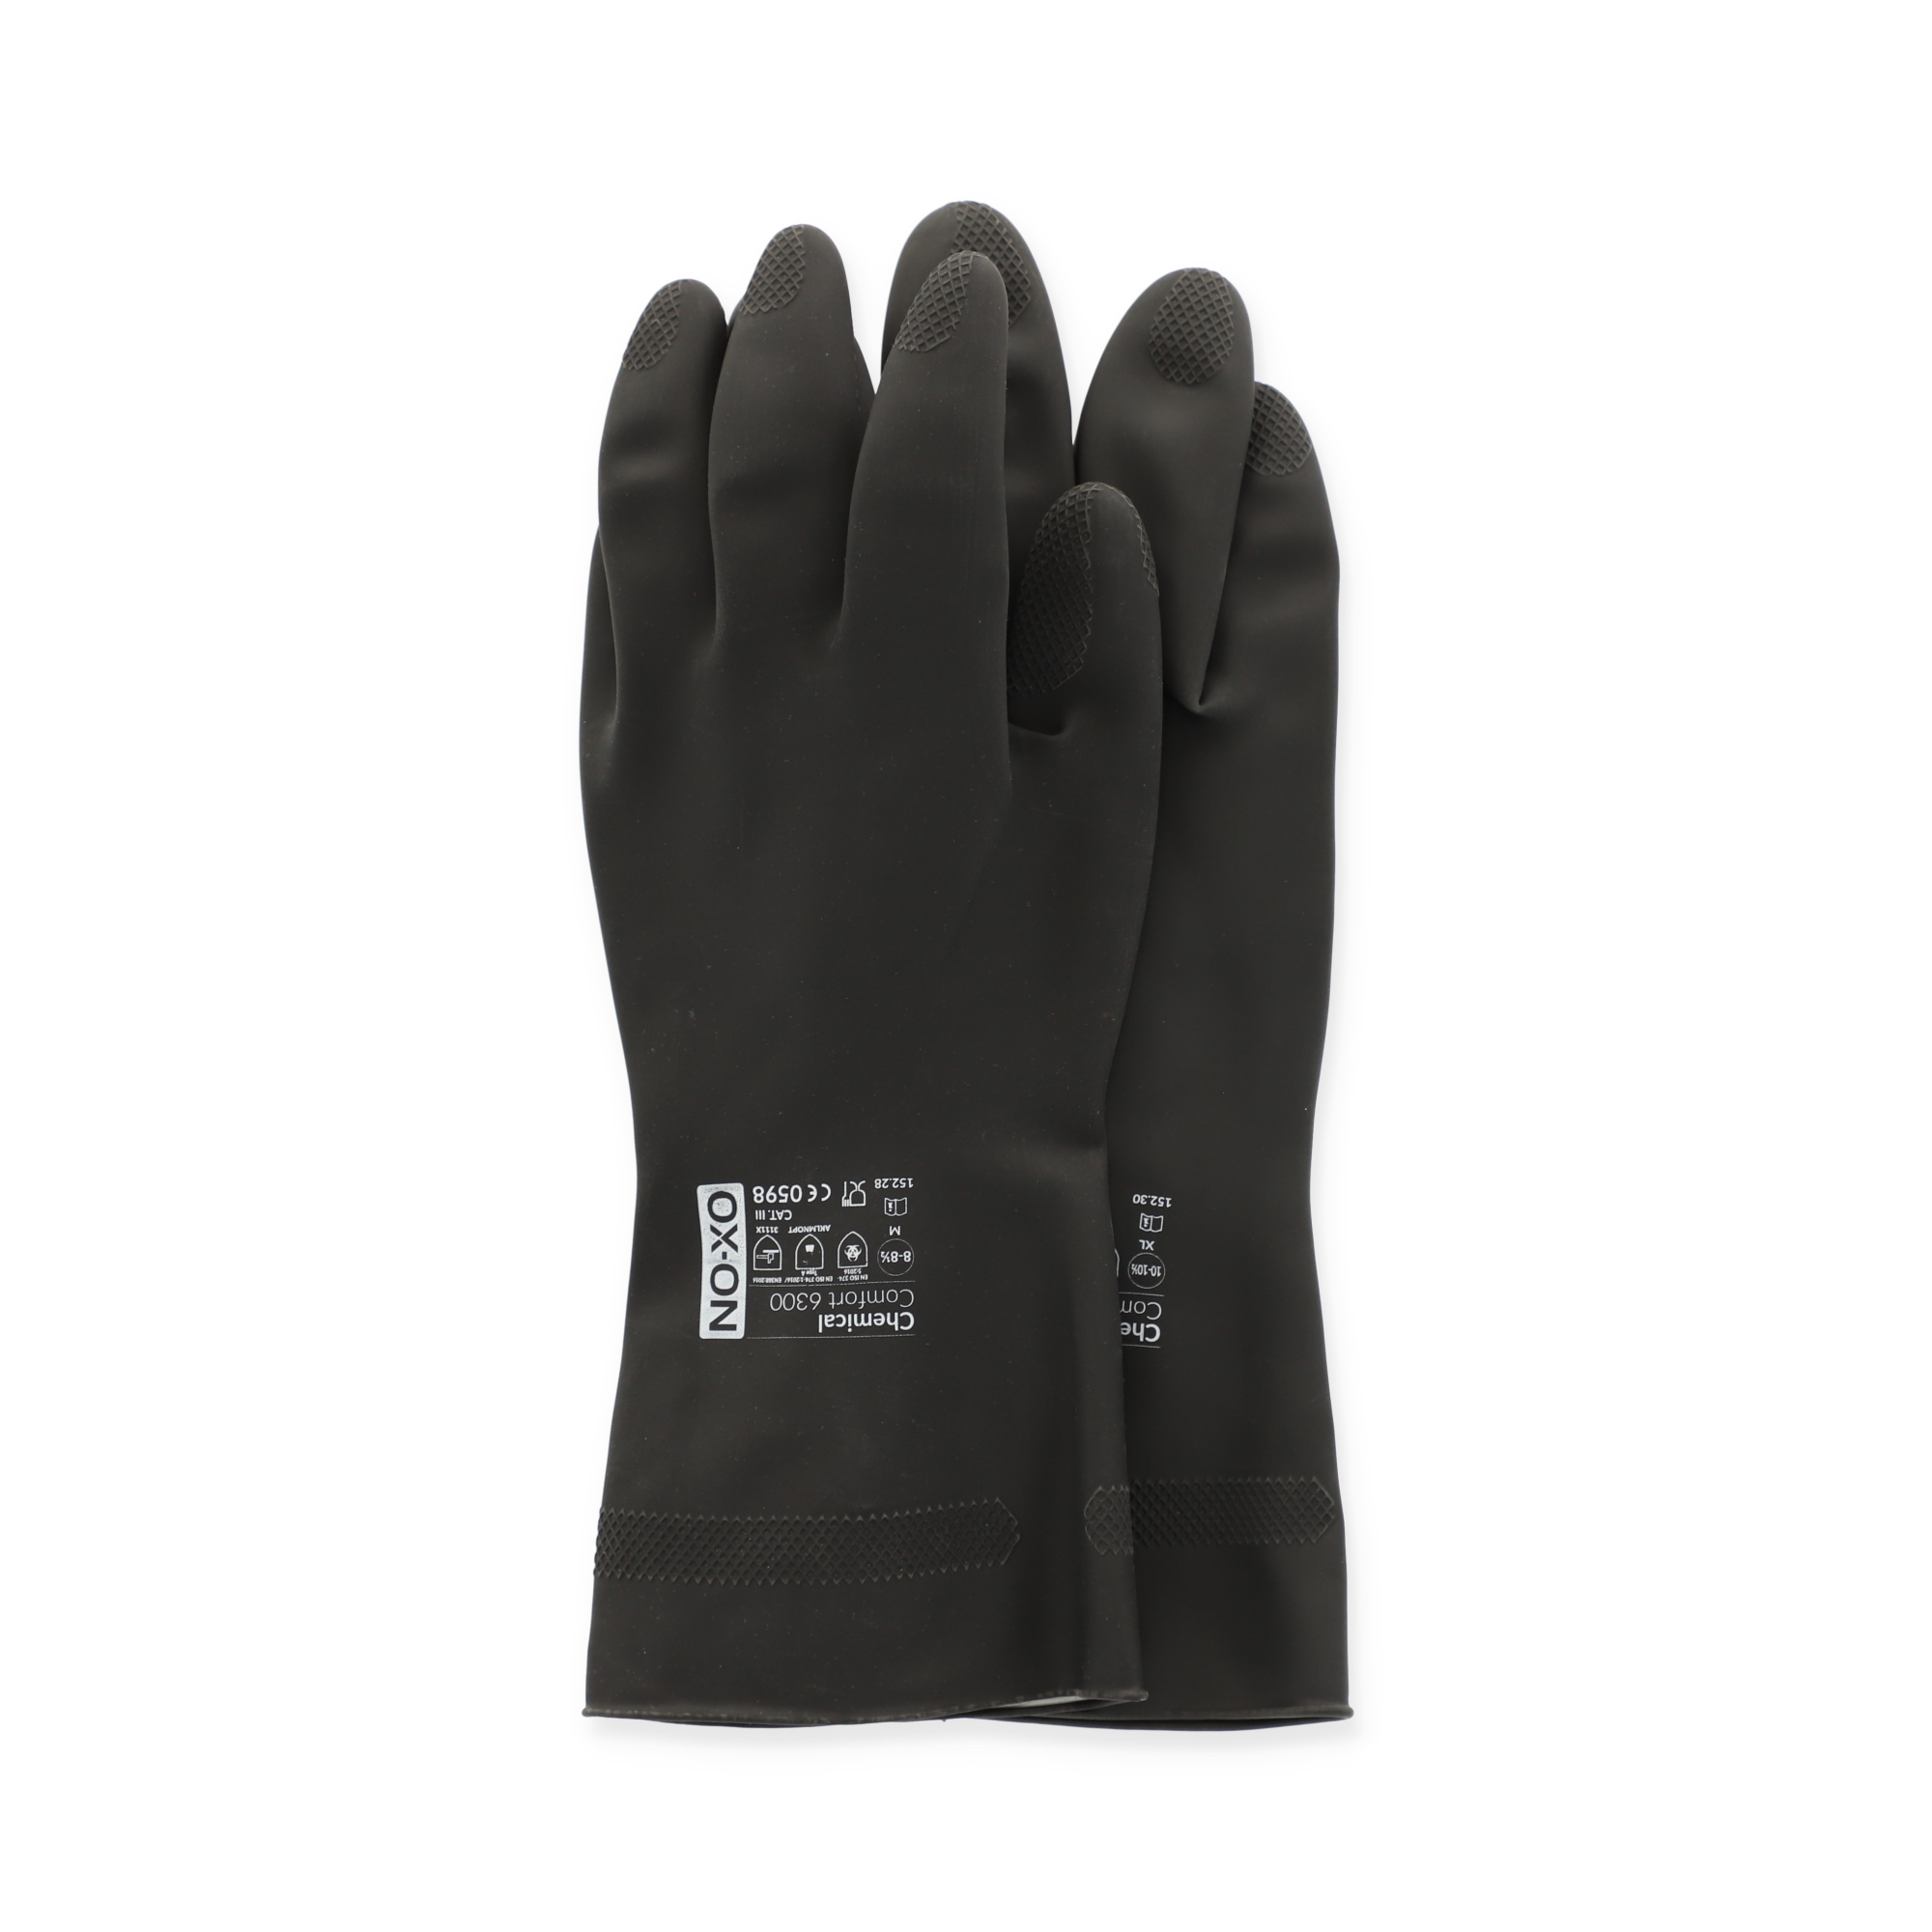 Handschuhe 'Chemical Comfort 6300' schwarz Gr. 8 + product picture